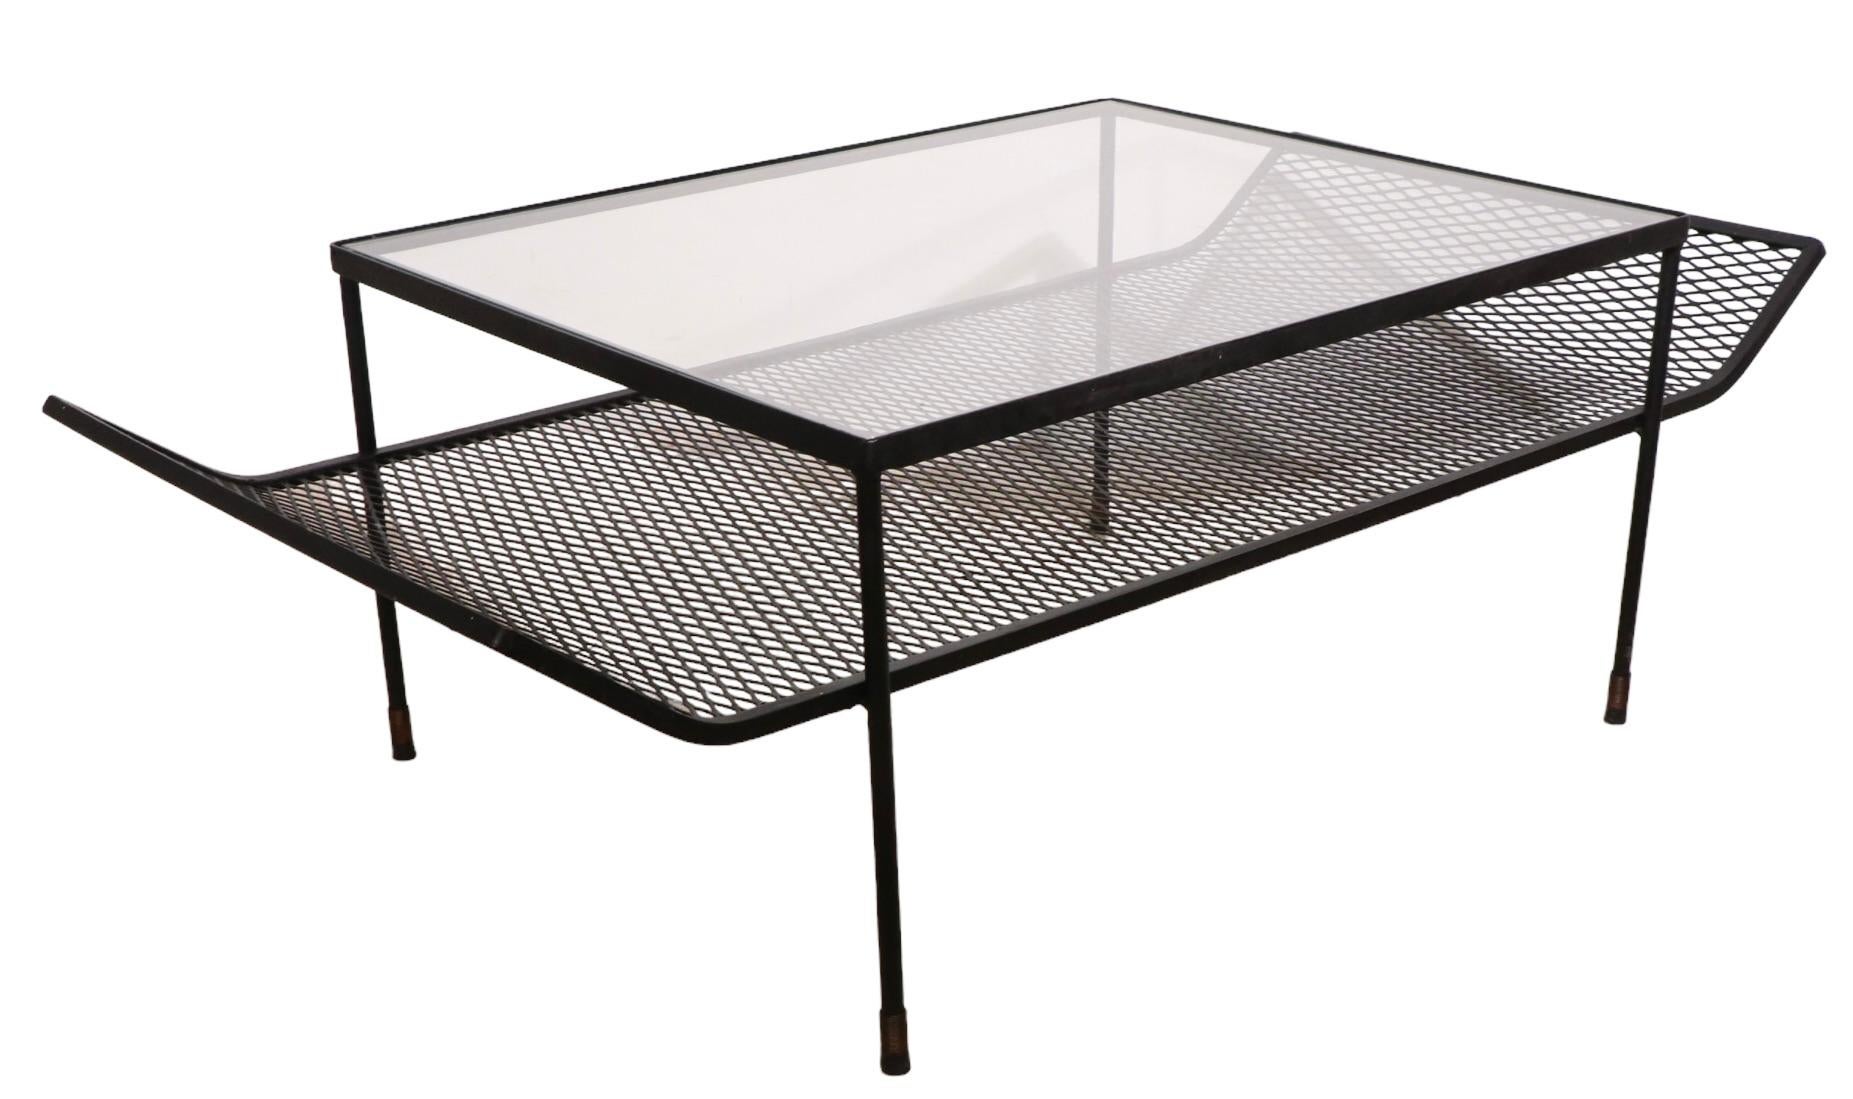  Architectural Mid-Century Wrought Iron and Glass Coffee Table Att. to Woodard  In Good Condition For Sale In New York, NY